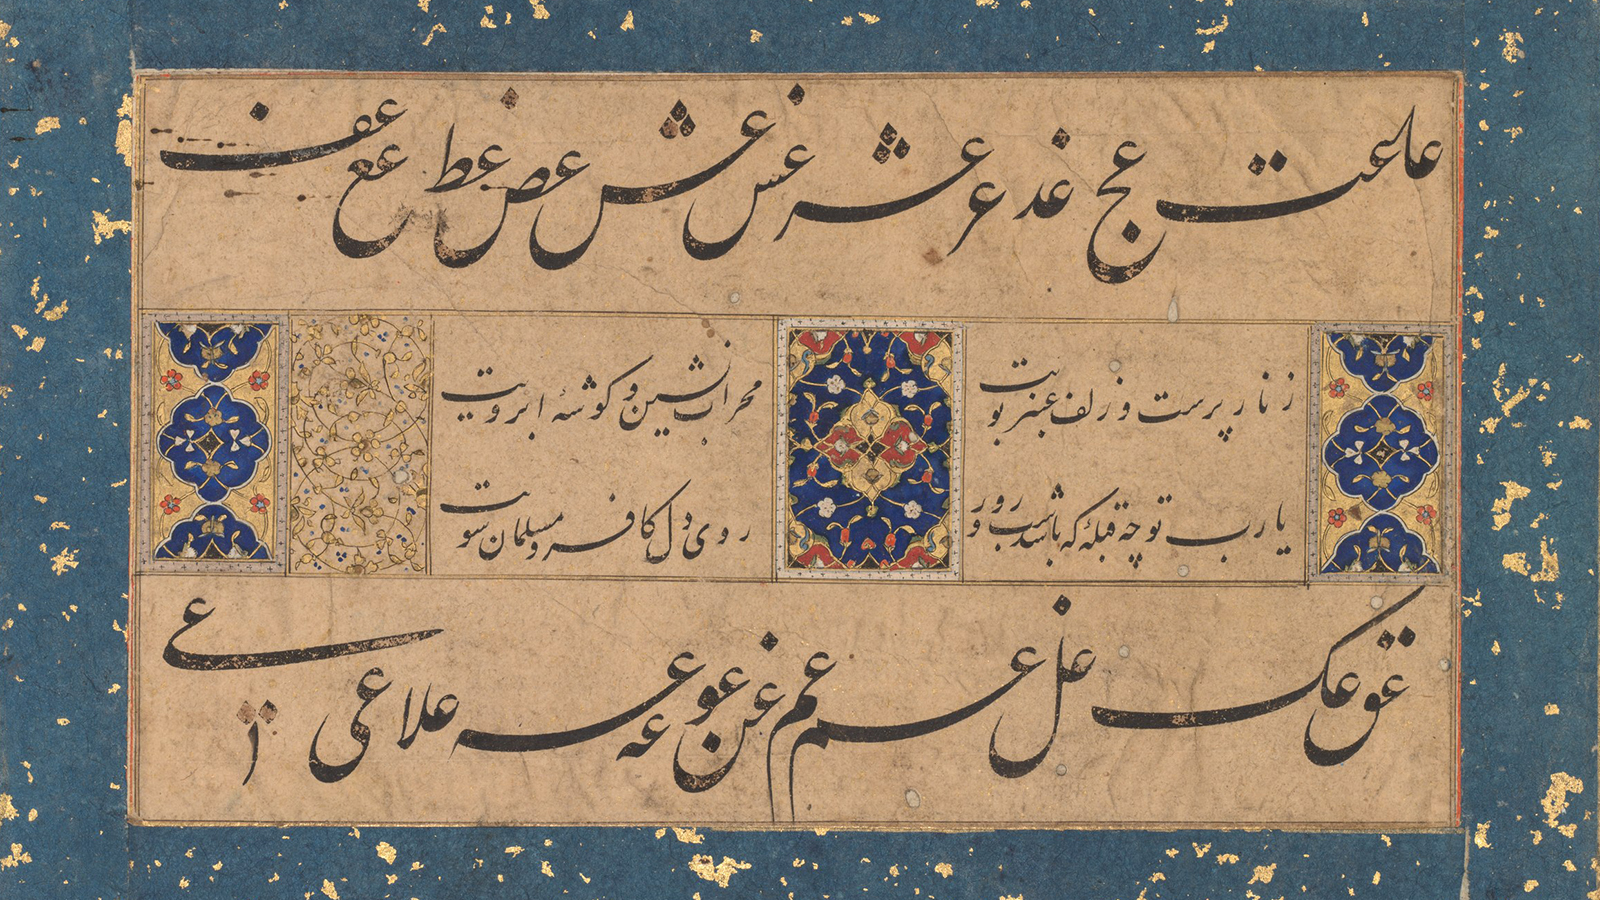 Persian ruba‘i (quatrain) calligraphy dating between circa 1610 and circa 1620. Gift in honor of Madeline Neves Clapp; Gift of Mrs. Henry White Cannon by exchange; Bequest of Louise T. Cooper; Leonard C. Hanna Jr. Fund; From the Catherine and Ralph Benkaim Collection.